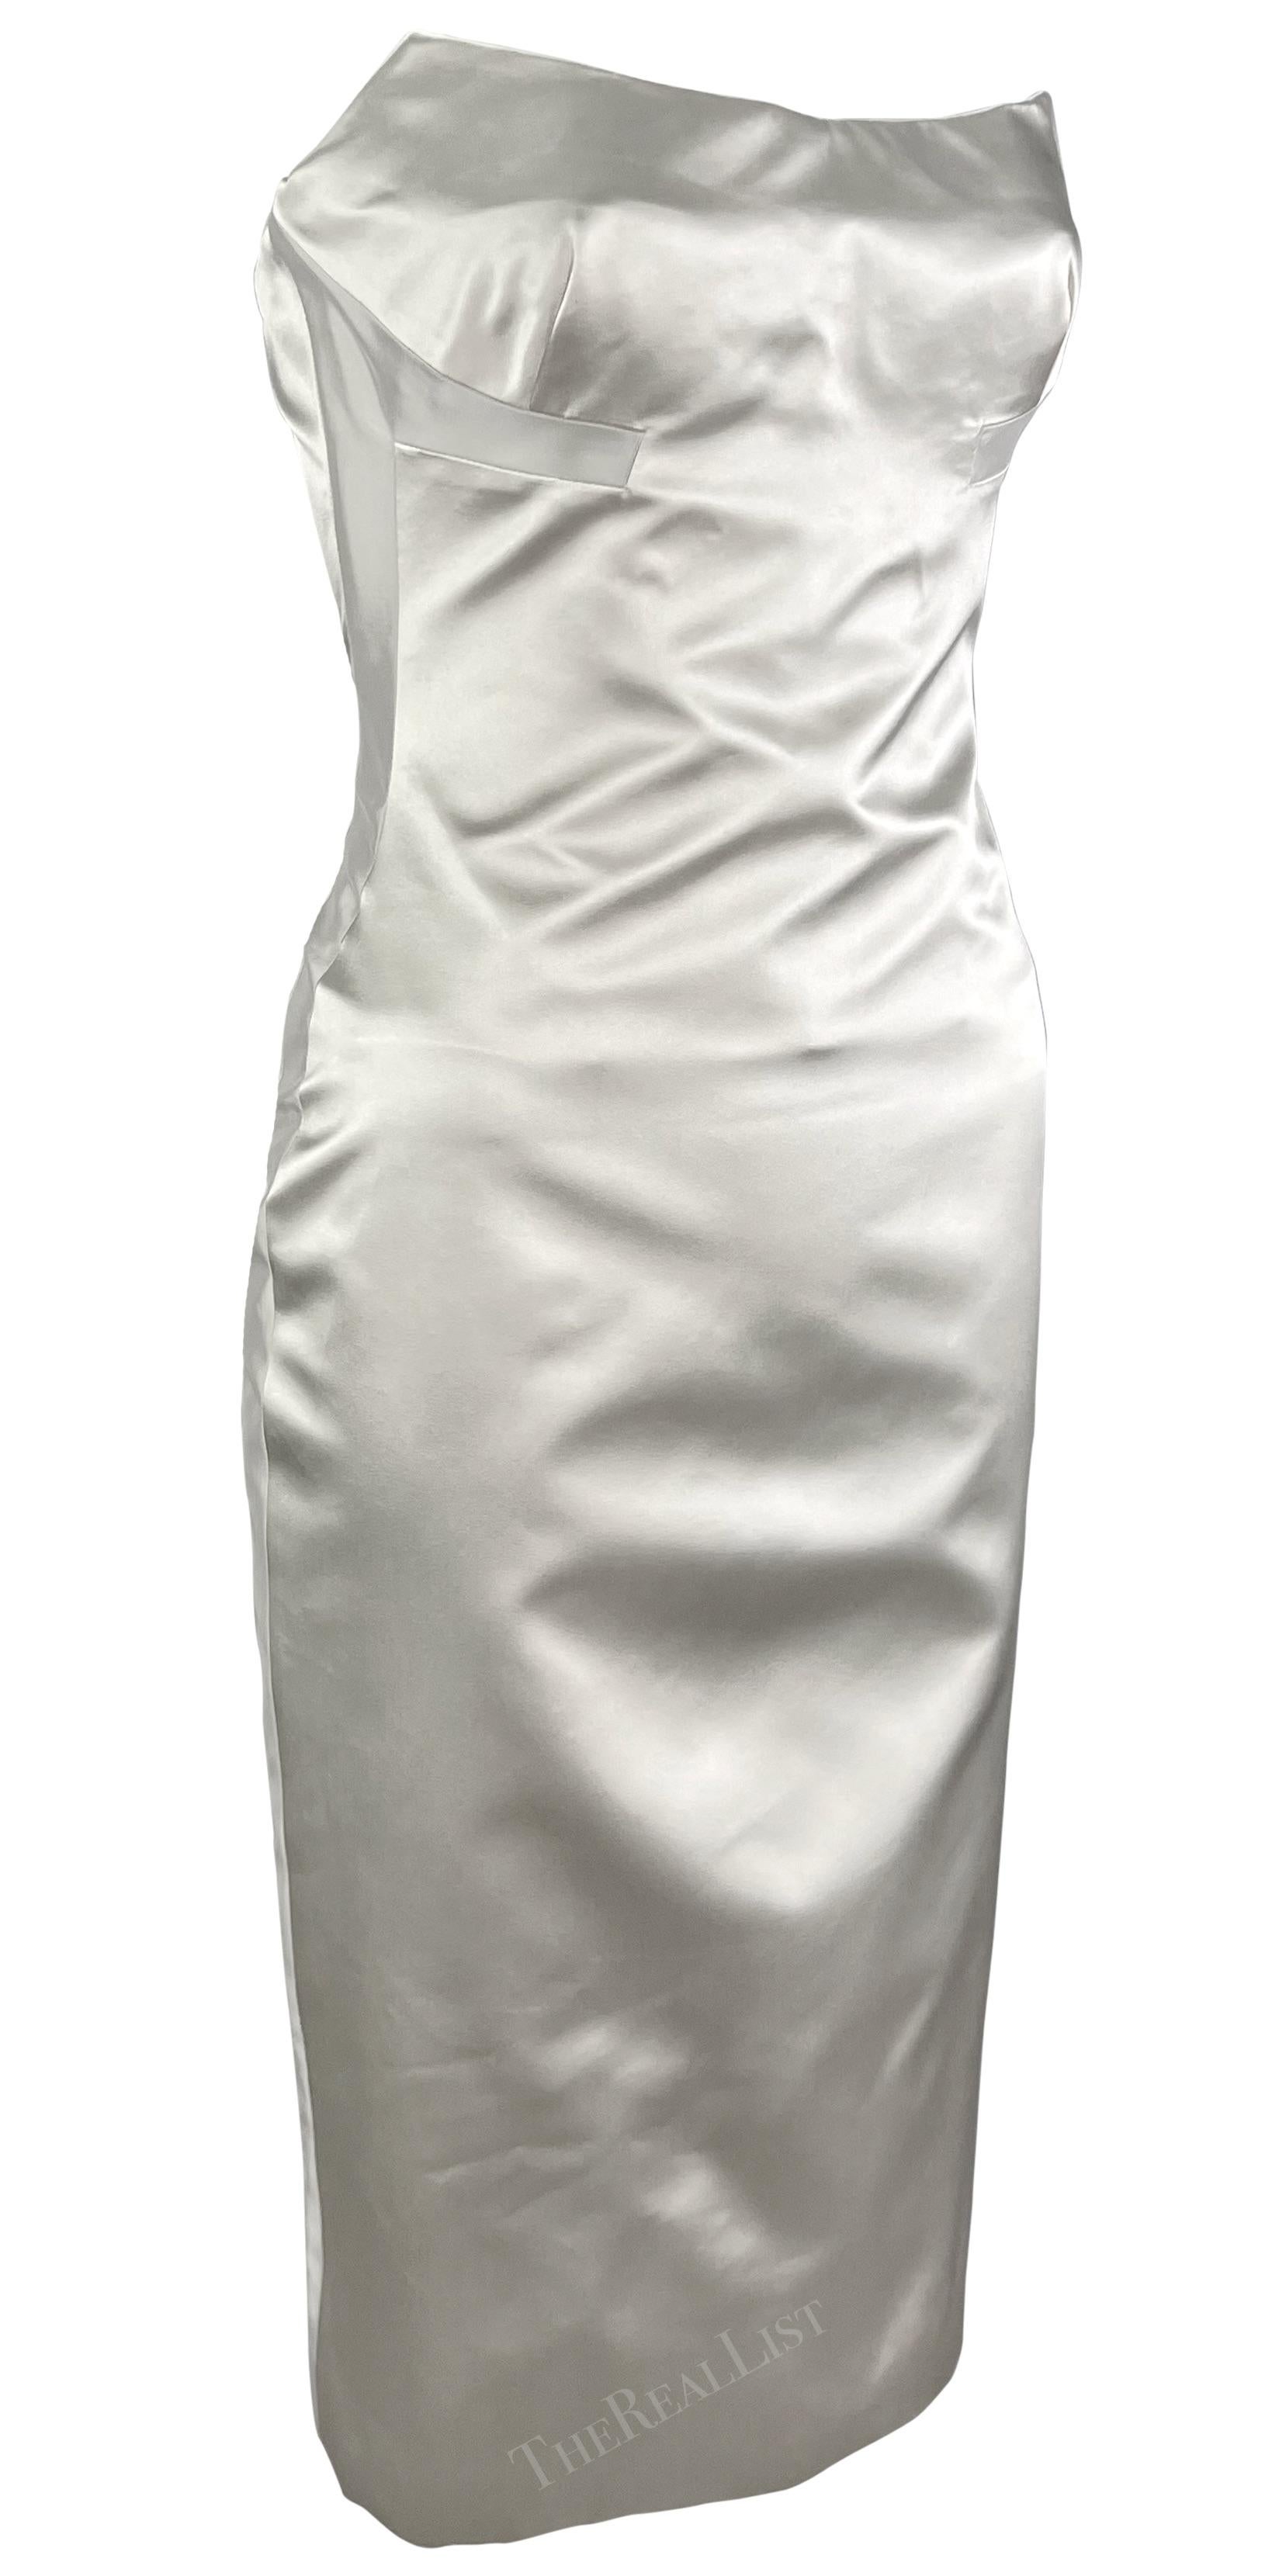 NWT S/S 2001 Gucci by Tom Ford Runway Ad Corset White Silk Satin Strapless Dress For Sale 10